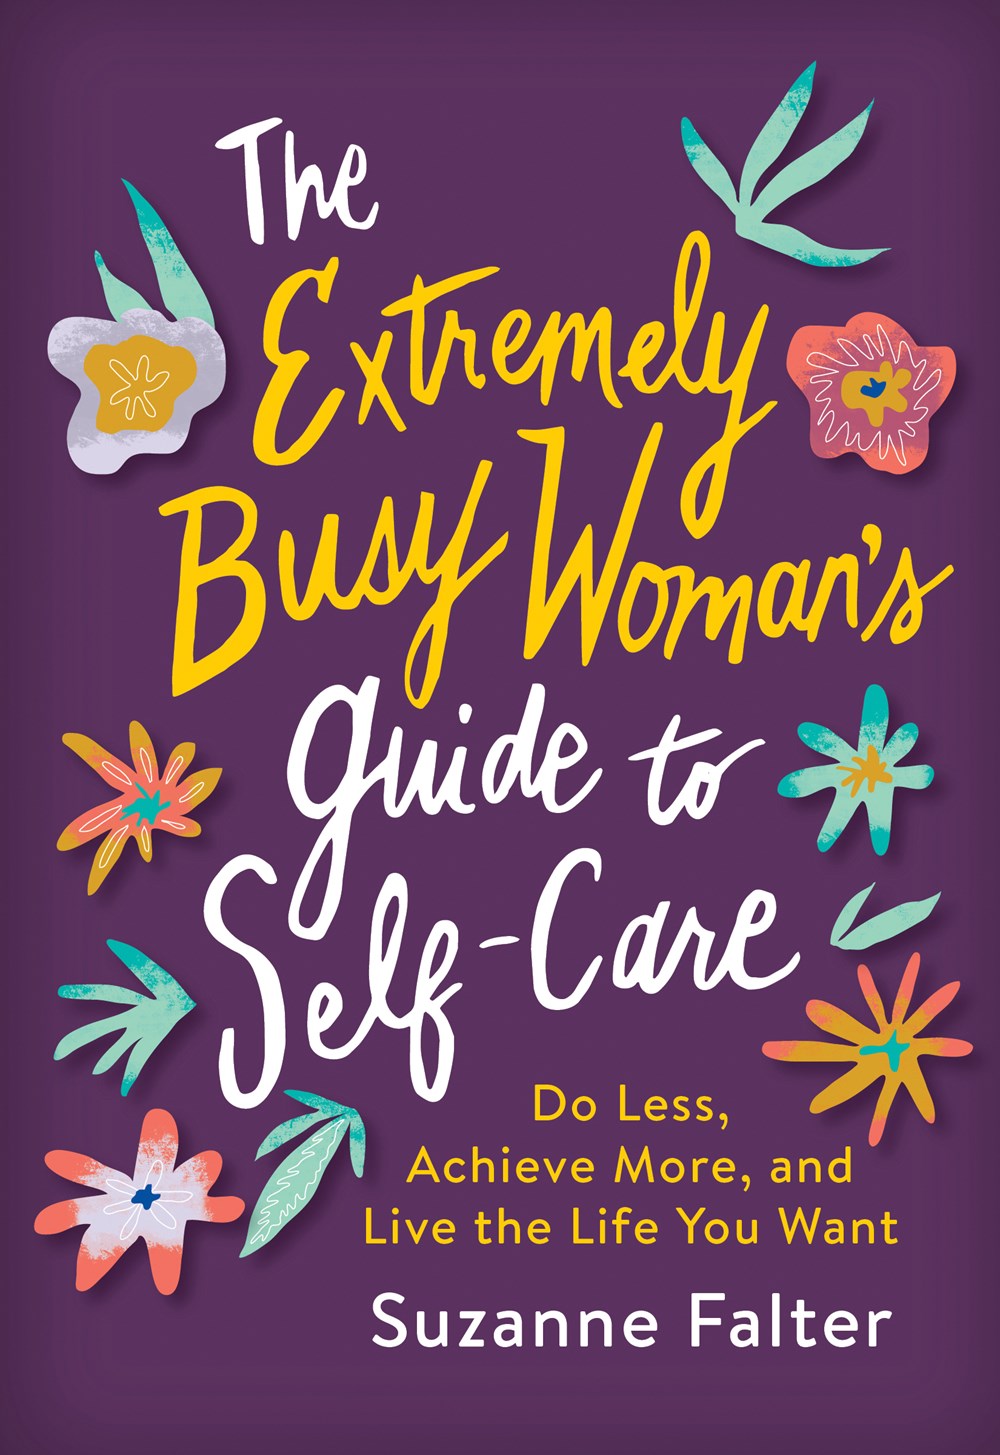 Extremely Busy Woman's Guide to Self-Care Book Jacket